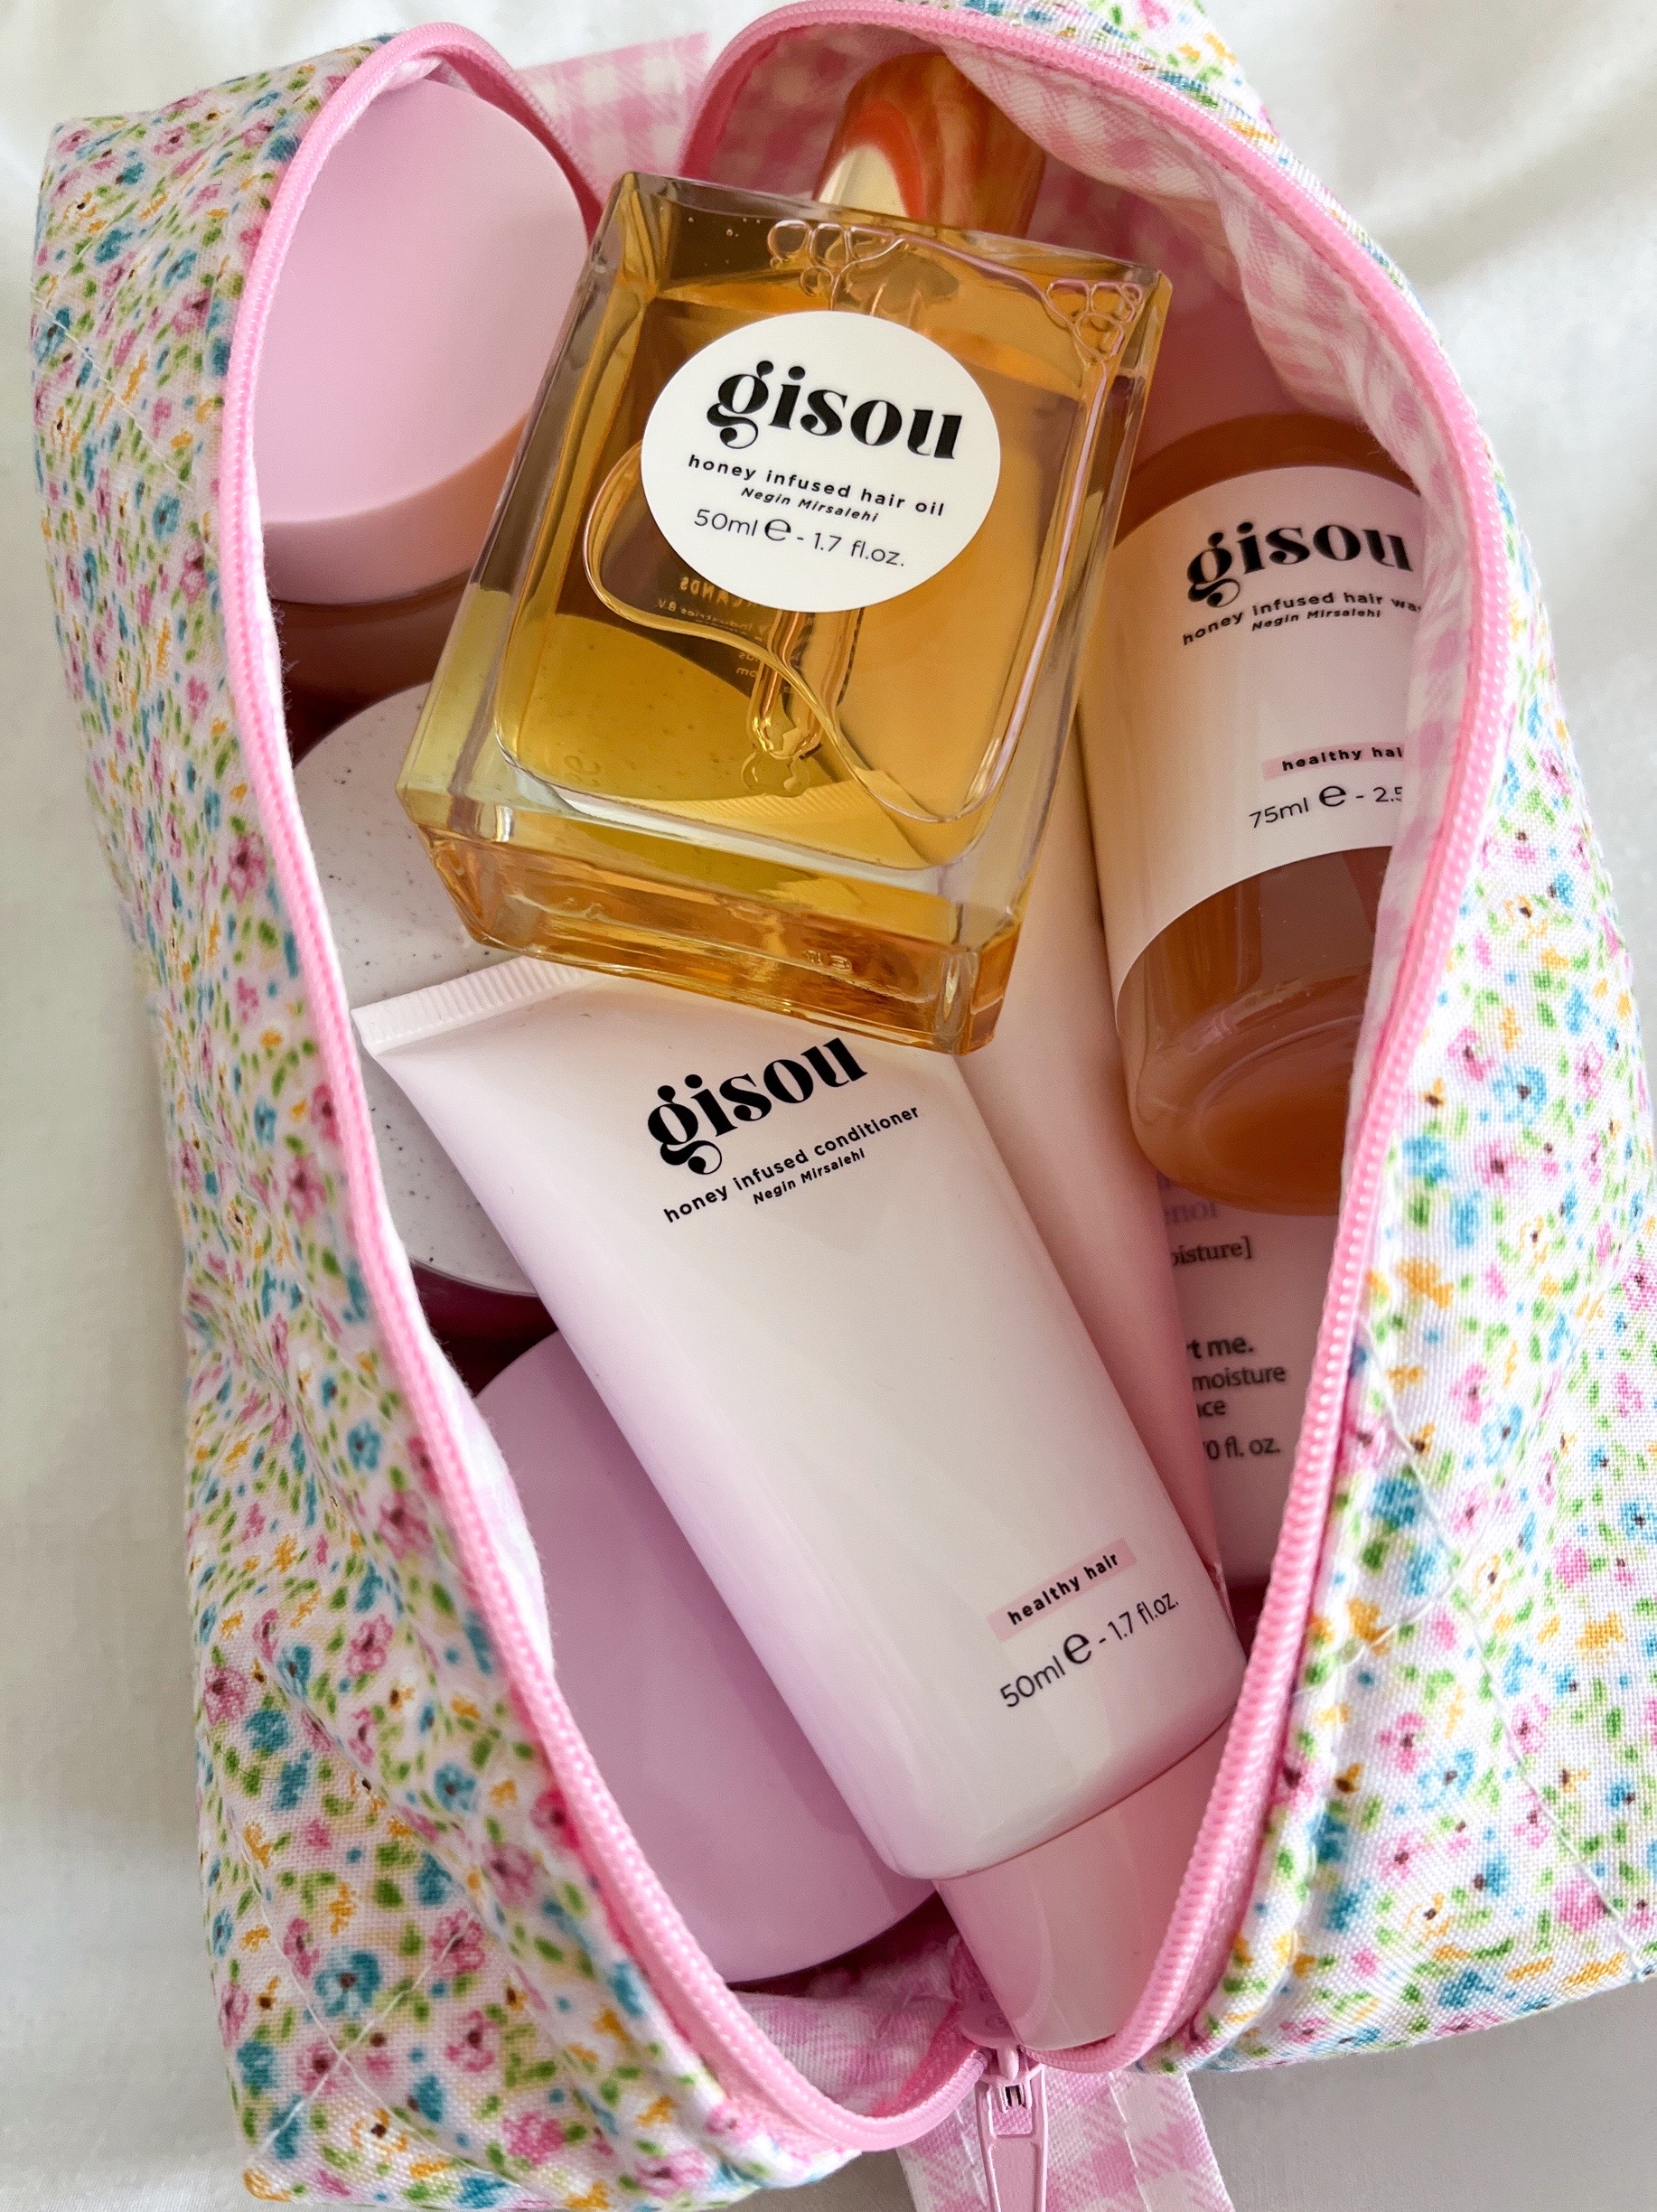 Gisou Honey Infused Haircare Review Is It Worth The Money? The